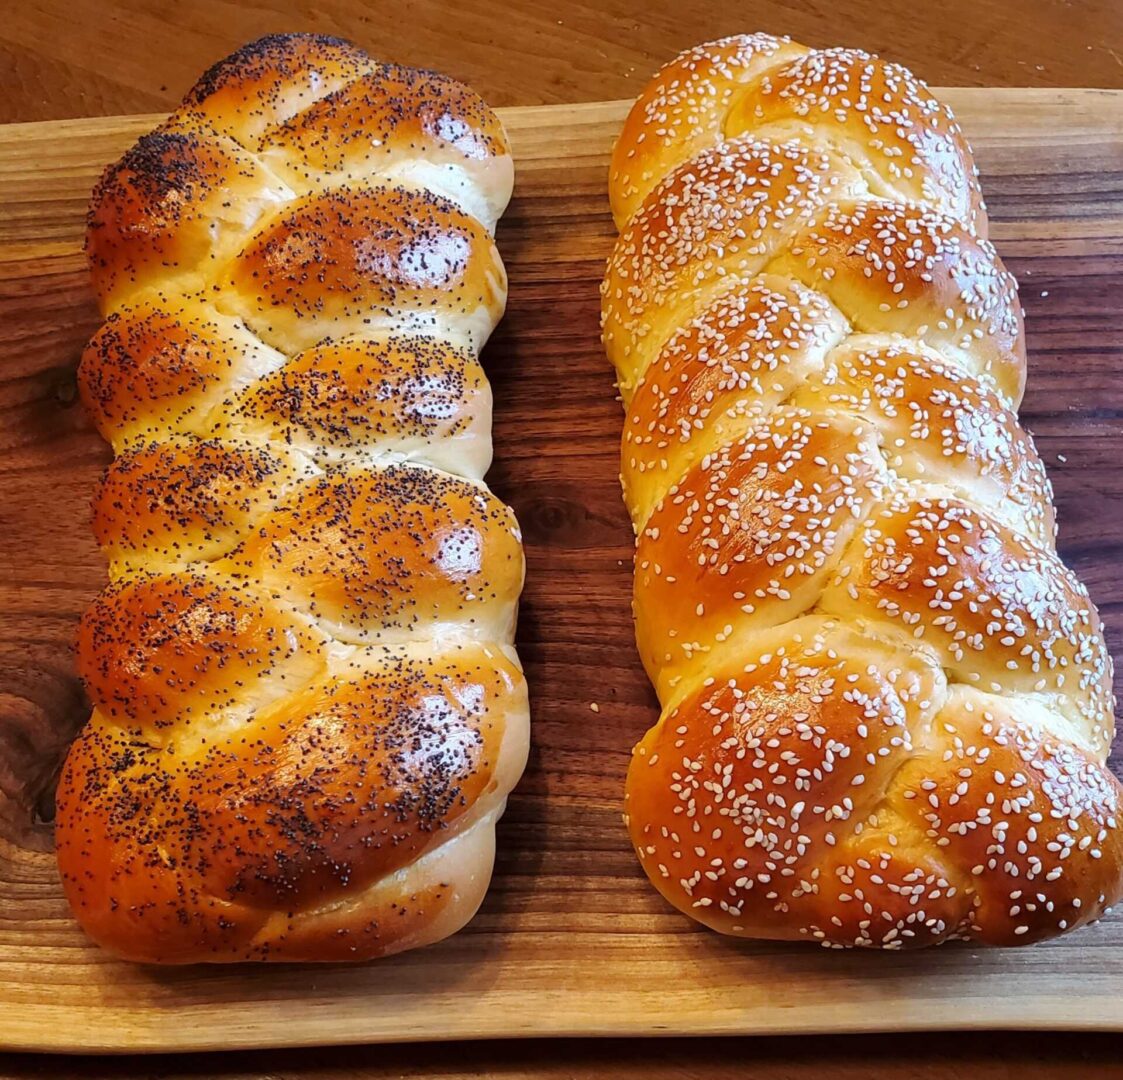 The Friday Baking Project presents two braided breads on a wooden cutting board.